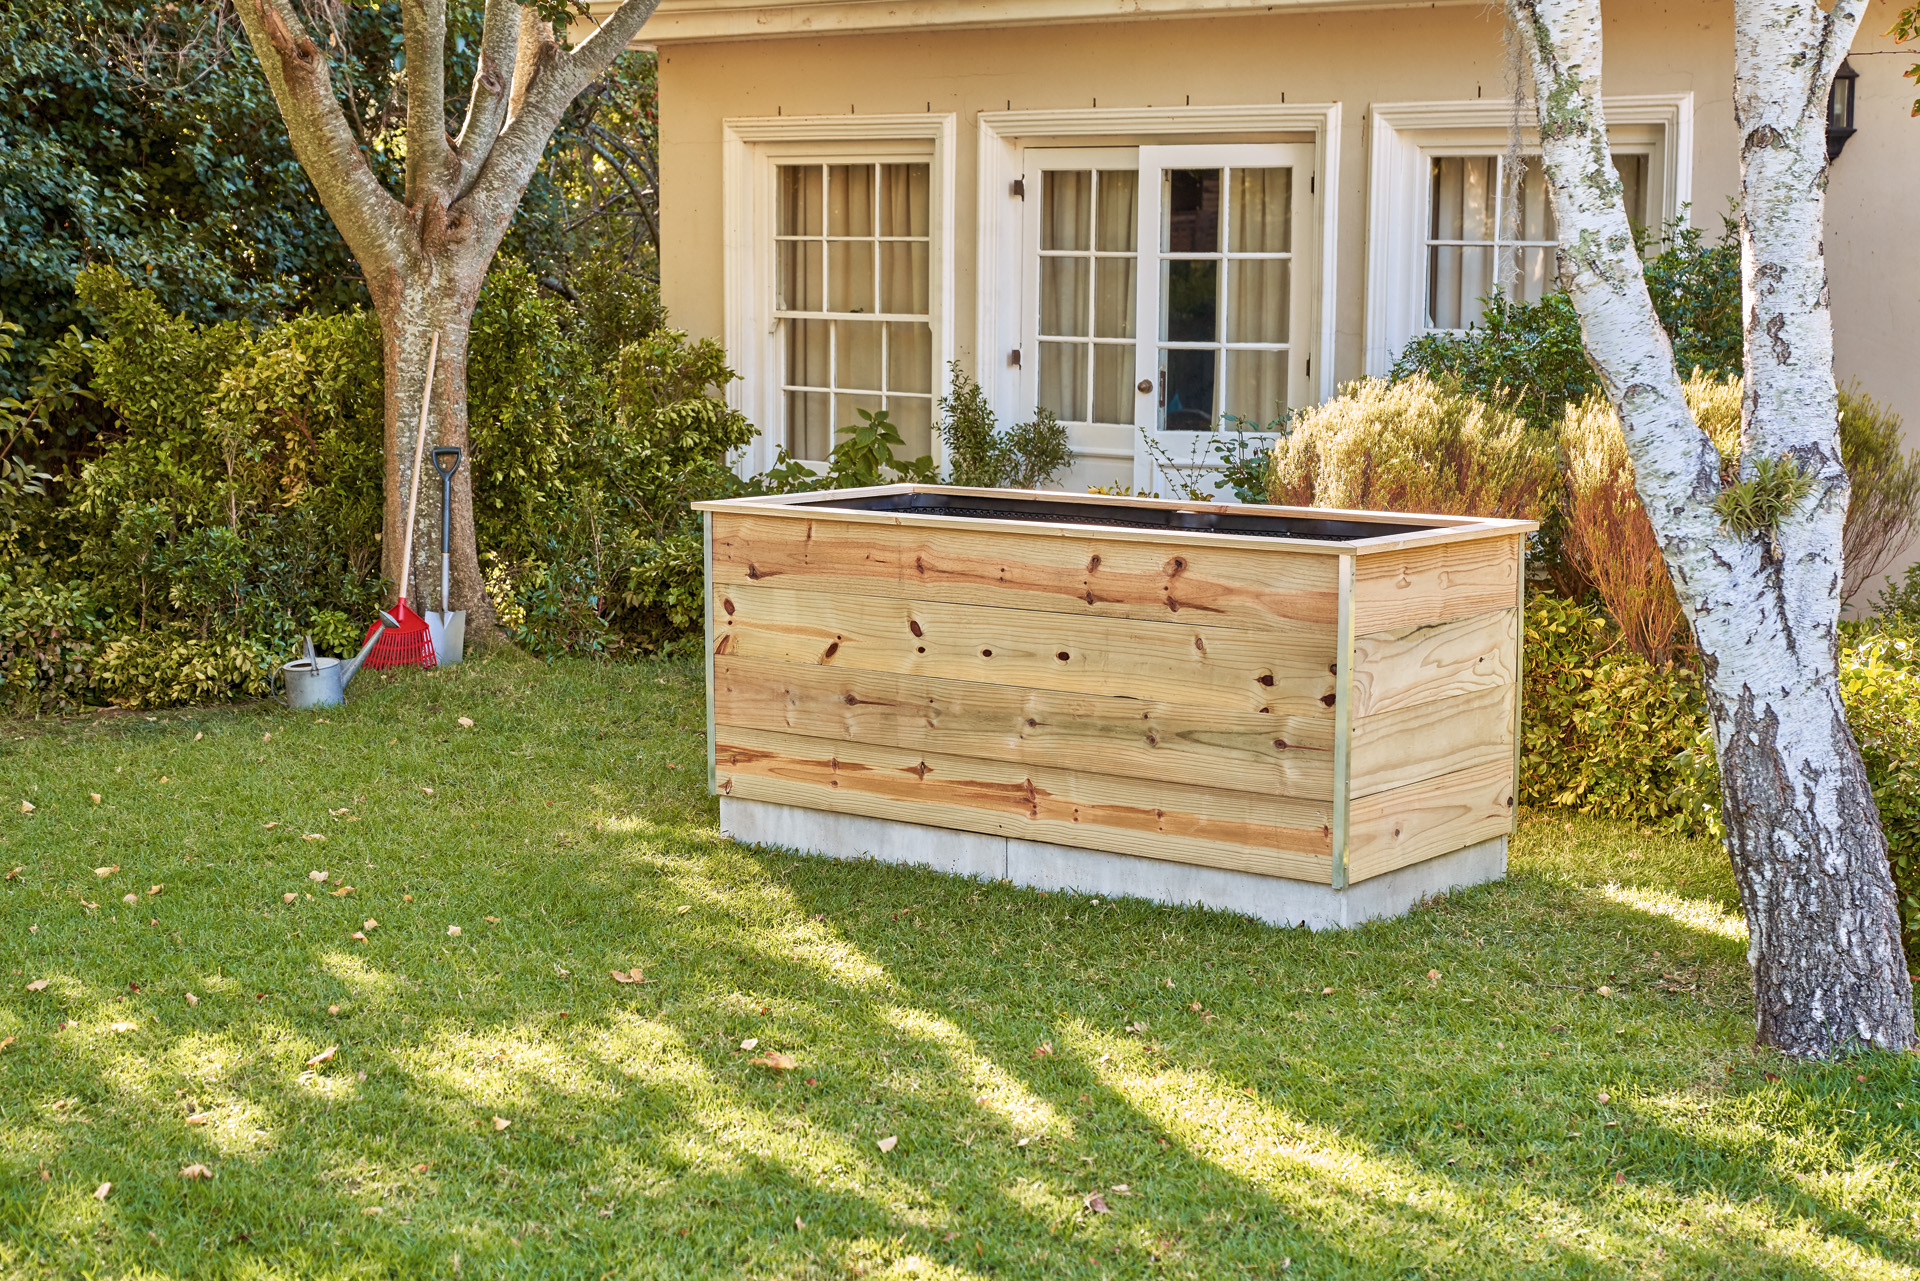 A tall raised bed made from wooden boards, in the garden in front of a house.